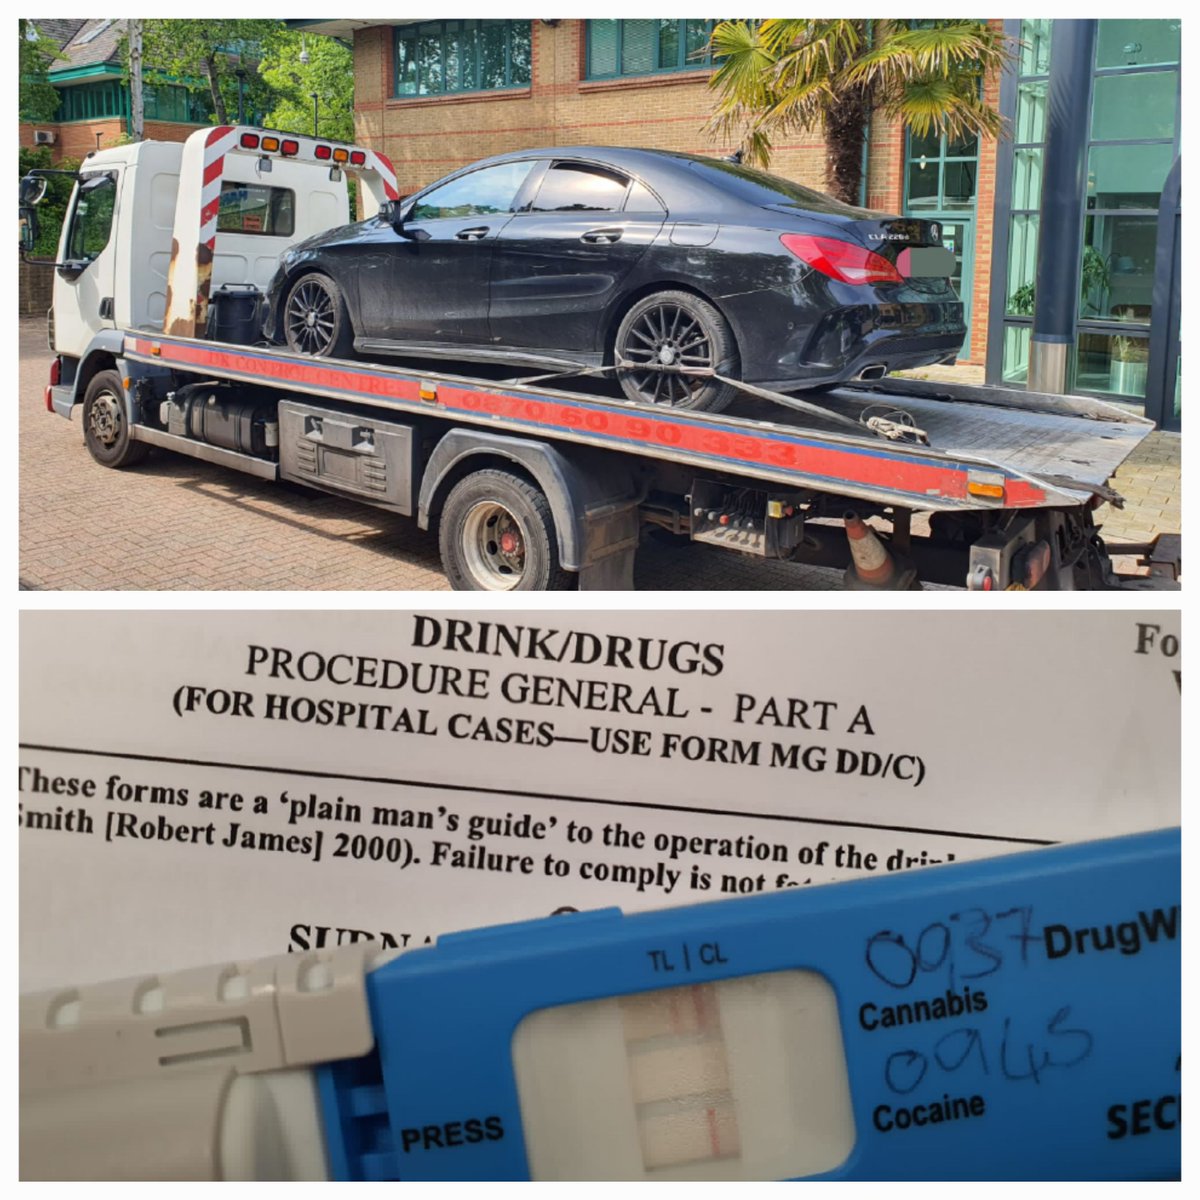 Stop made by #VanguardRST yesterday in Leatherhead, as part of an operation in support of #ProjectEDWARD.

Whilst originally stopped for tints on the vehicle, on conducting checks the driver attempted to provide false details but couldn't remember their false DOB...

1/2